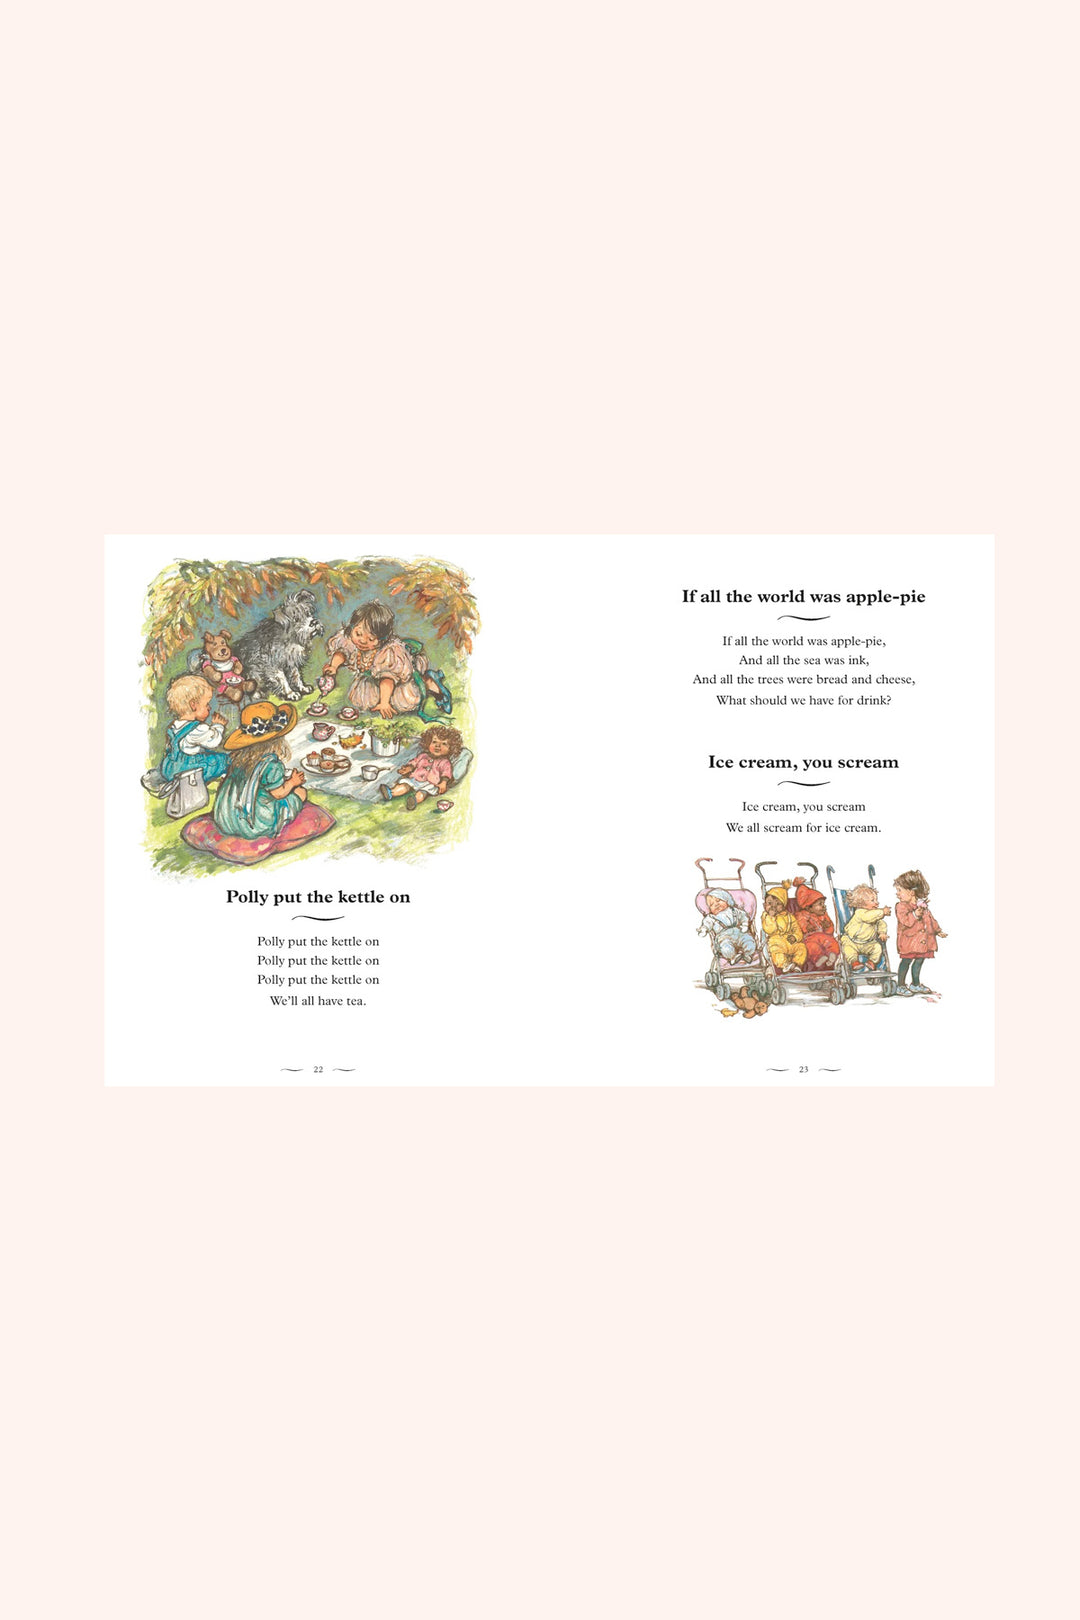 Round and Round The Garden. A First Book Of Nursery Rhymes